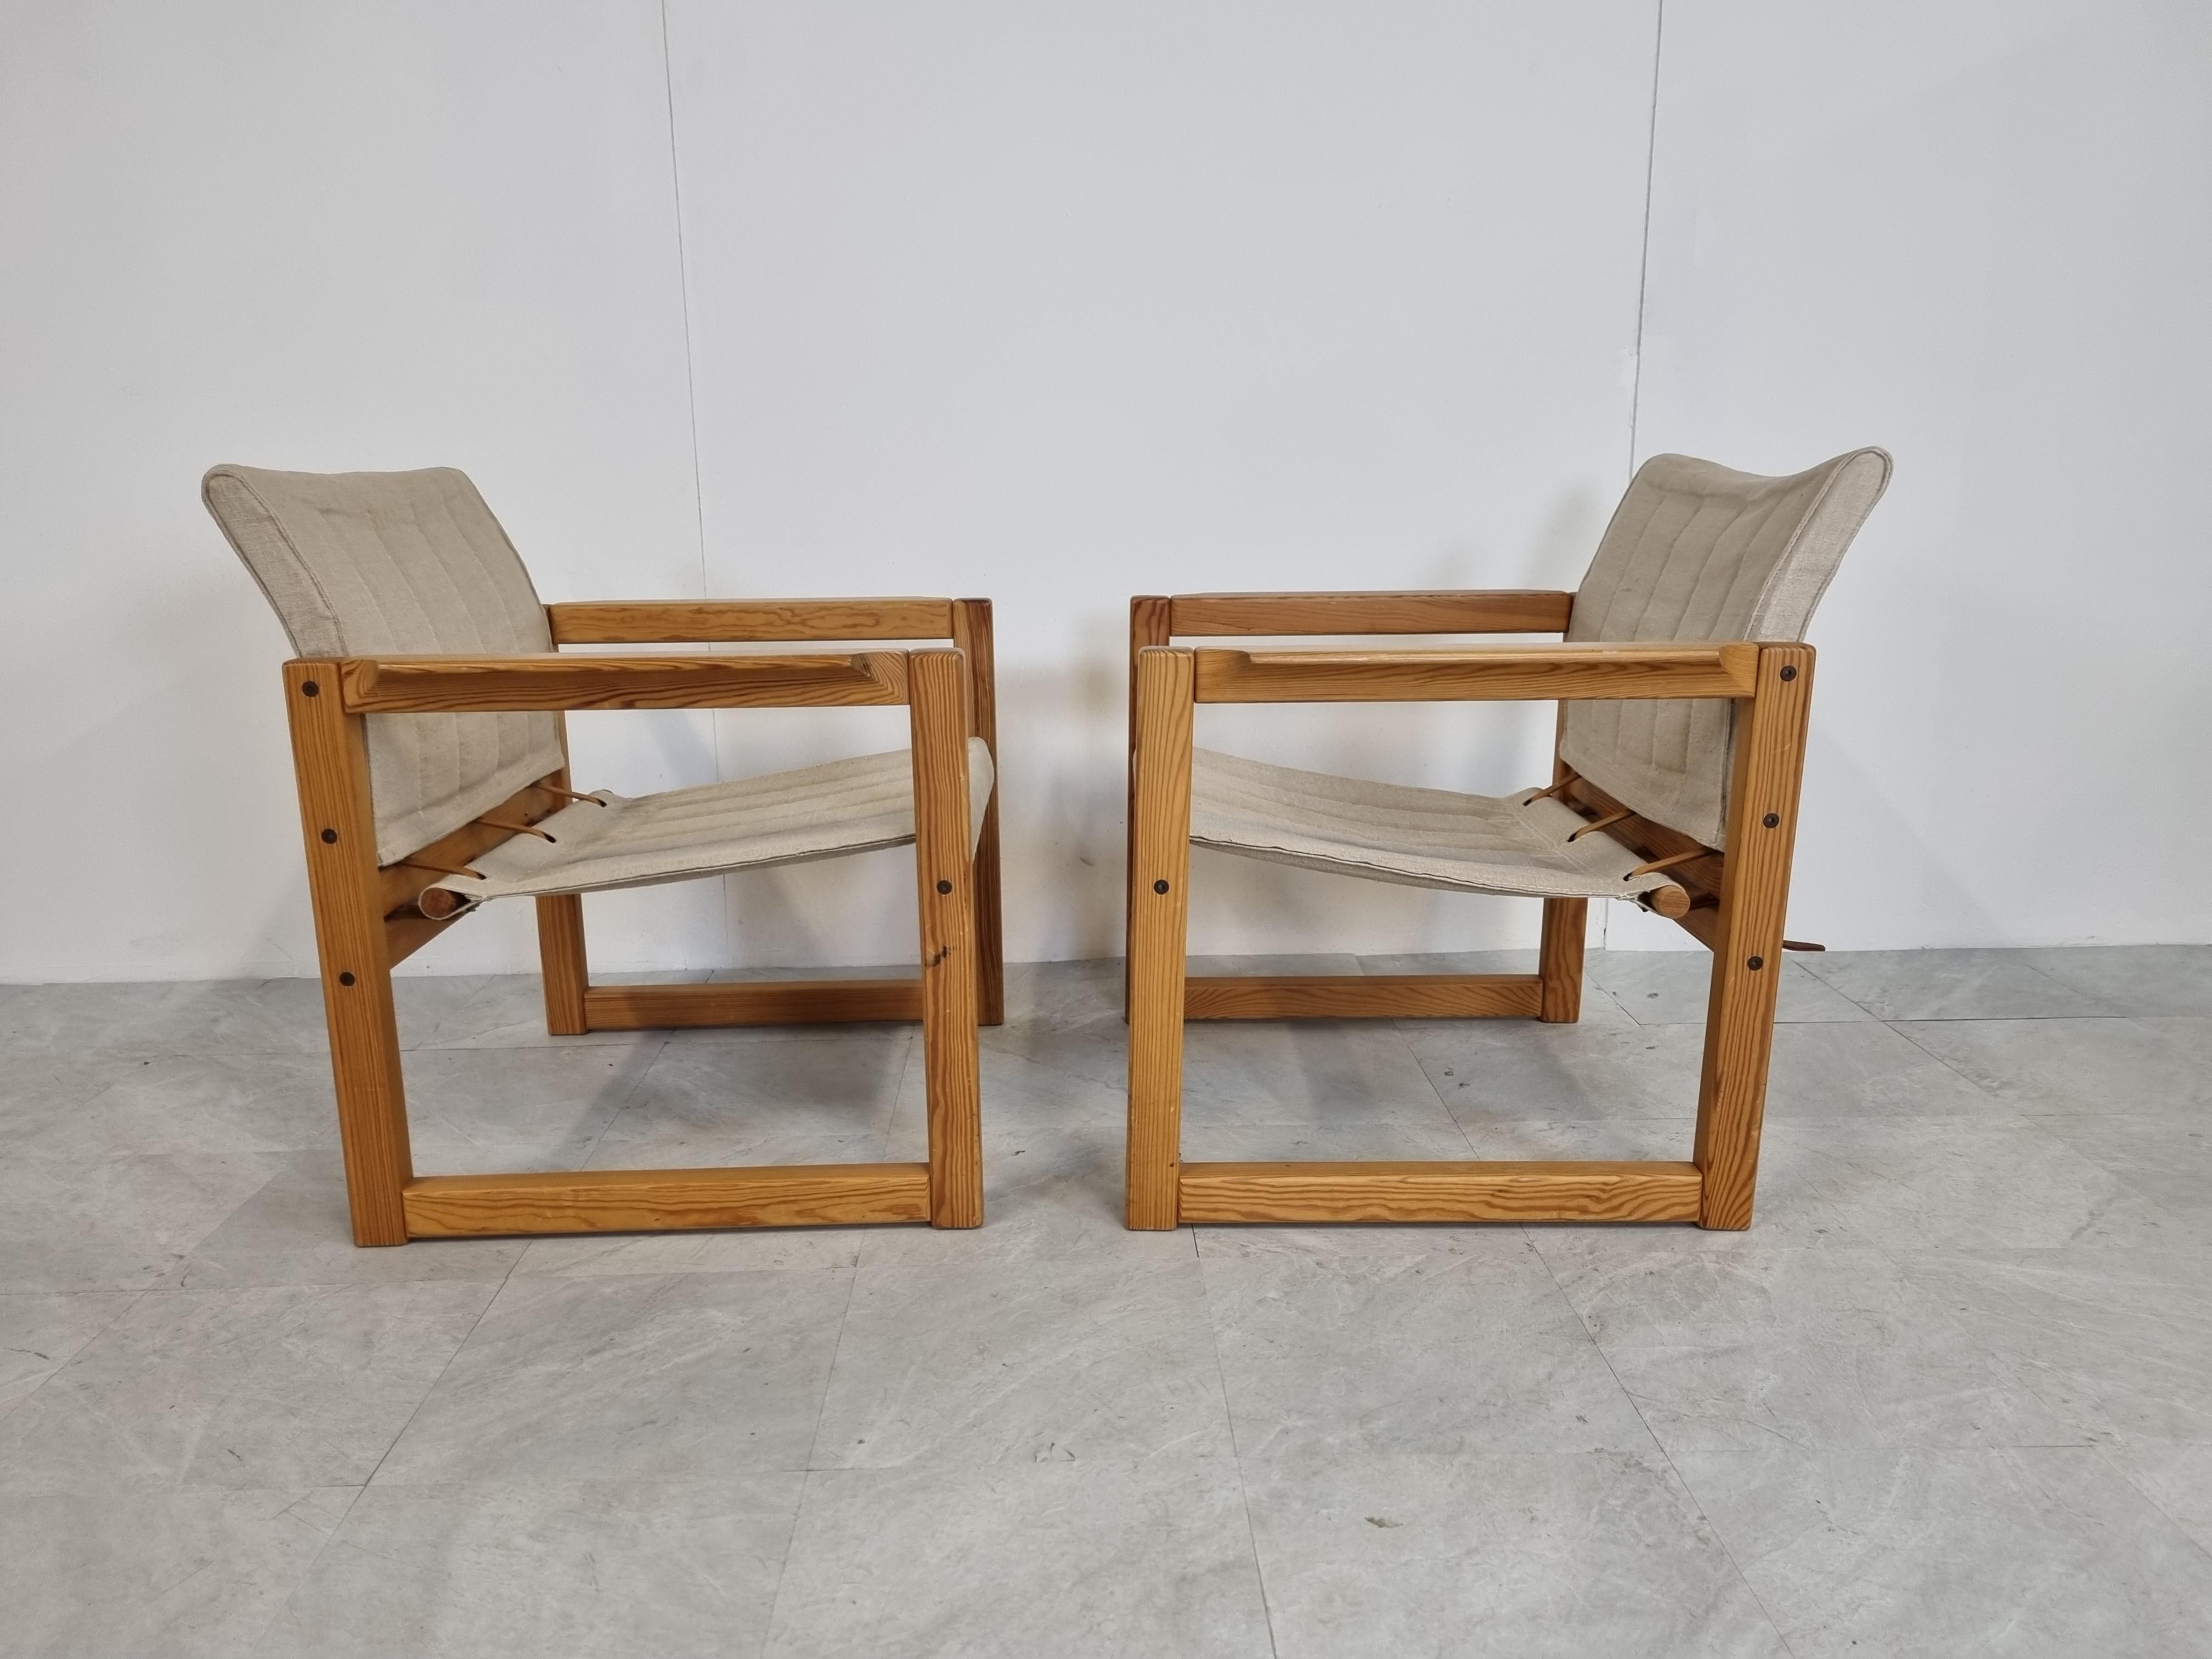 Late 20th Century Pair of Diana Armchairs Designed by Karin Mobring for Ikea, 1970s